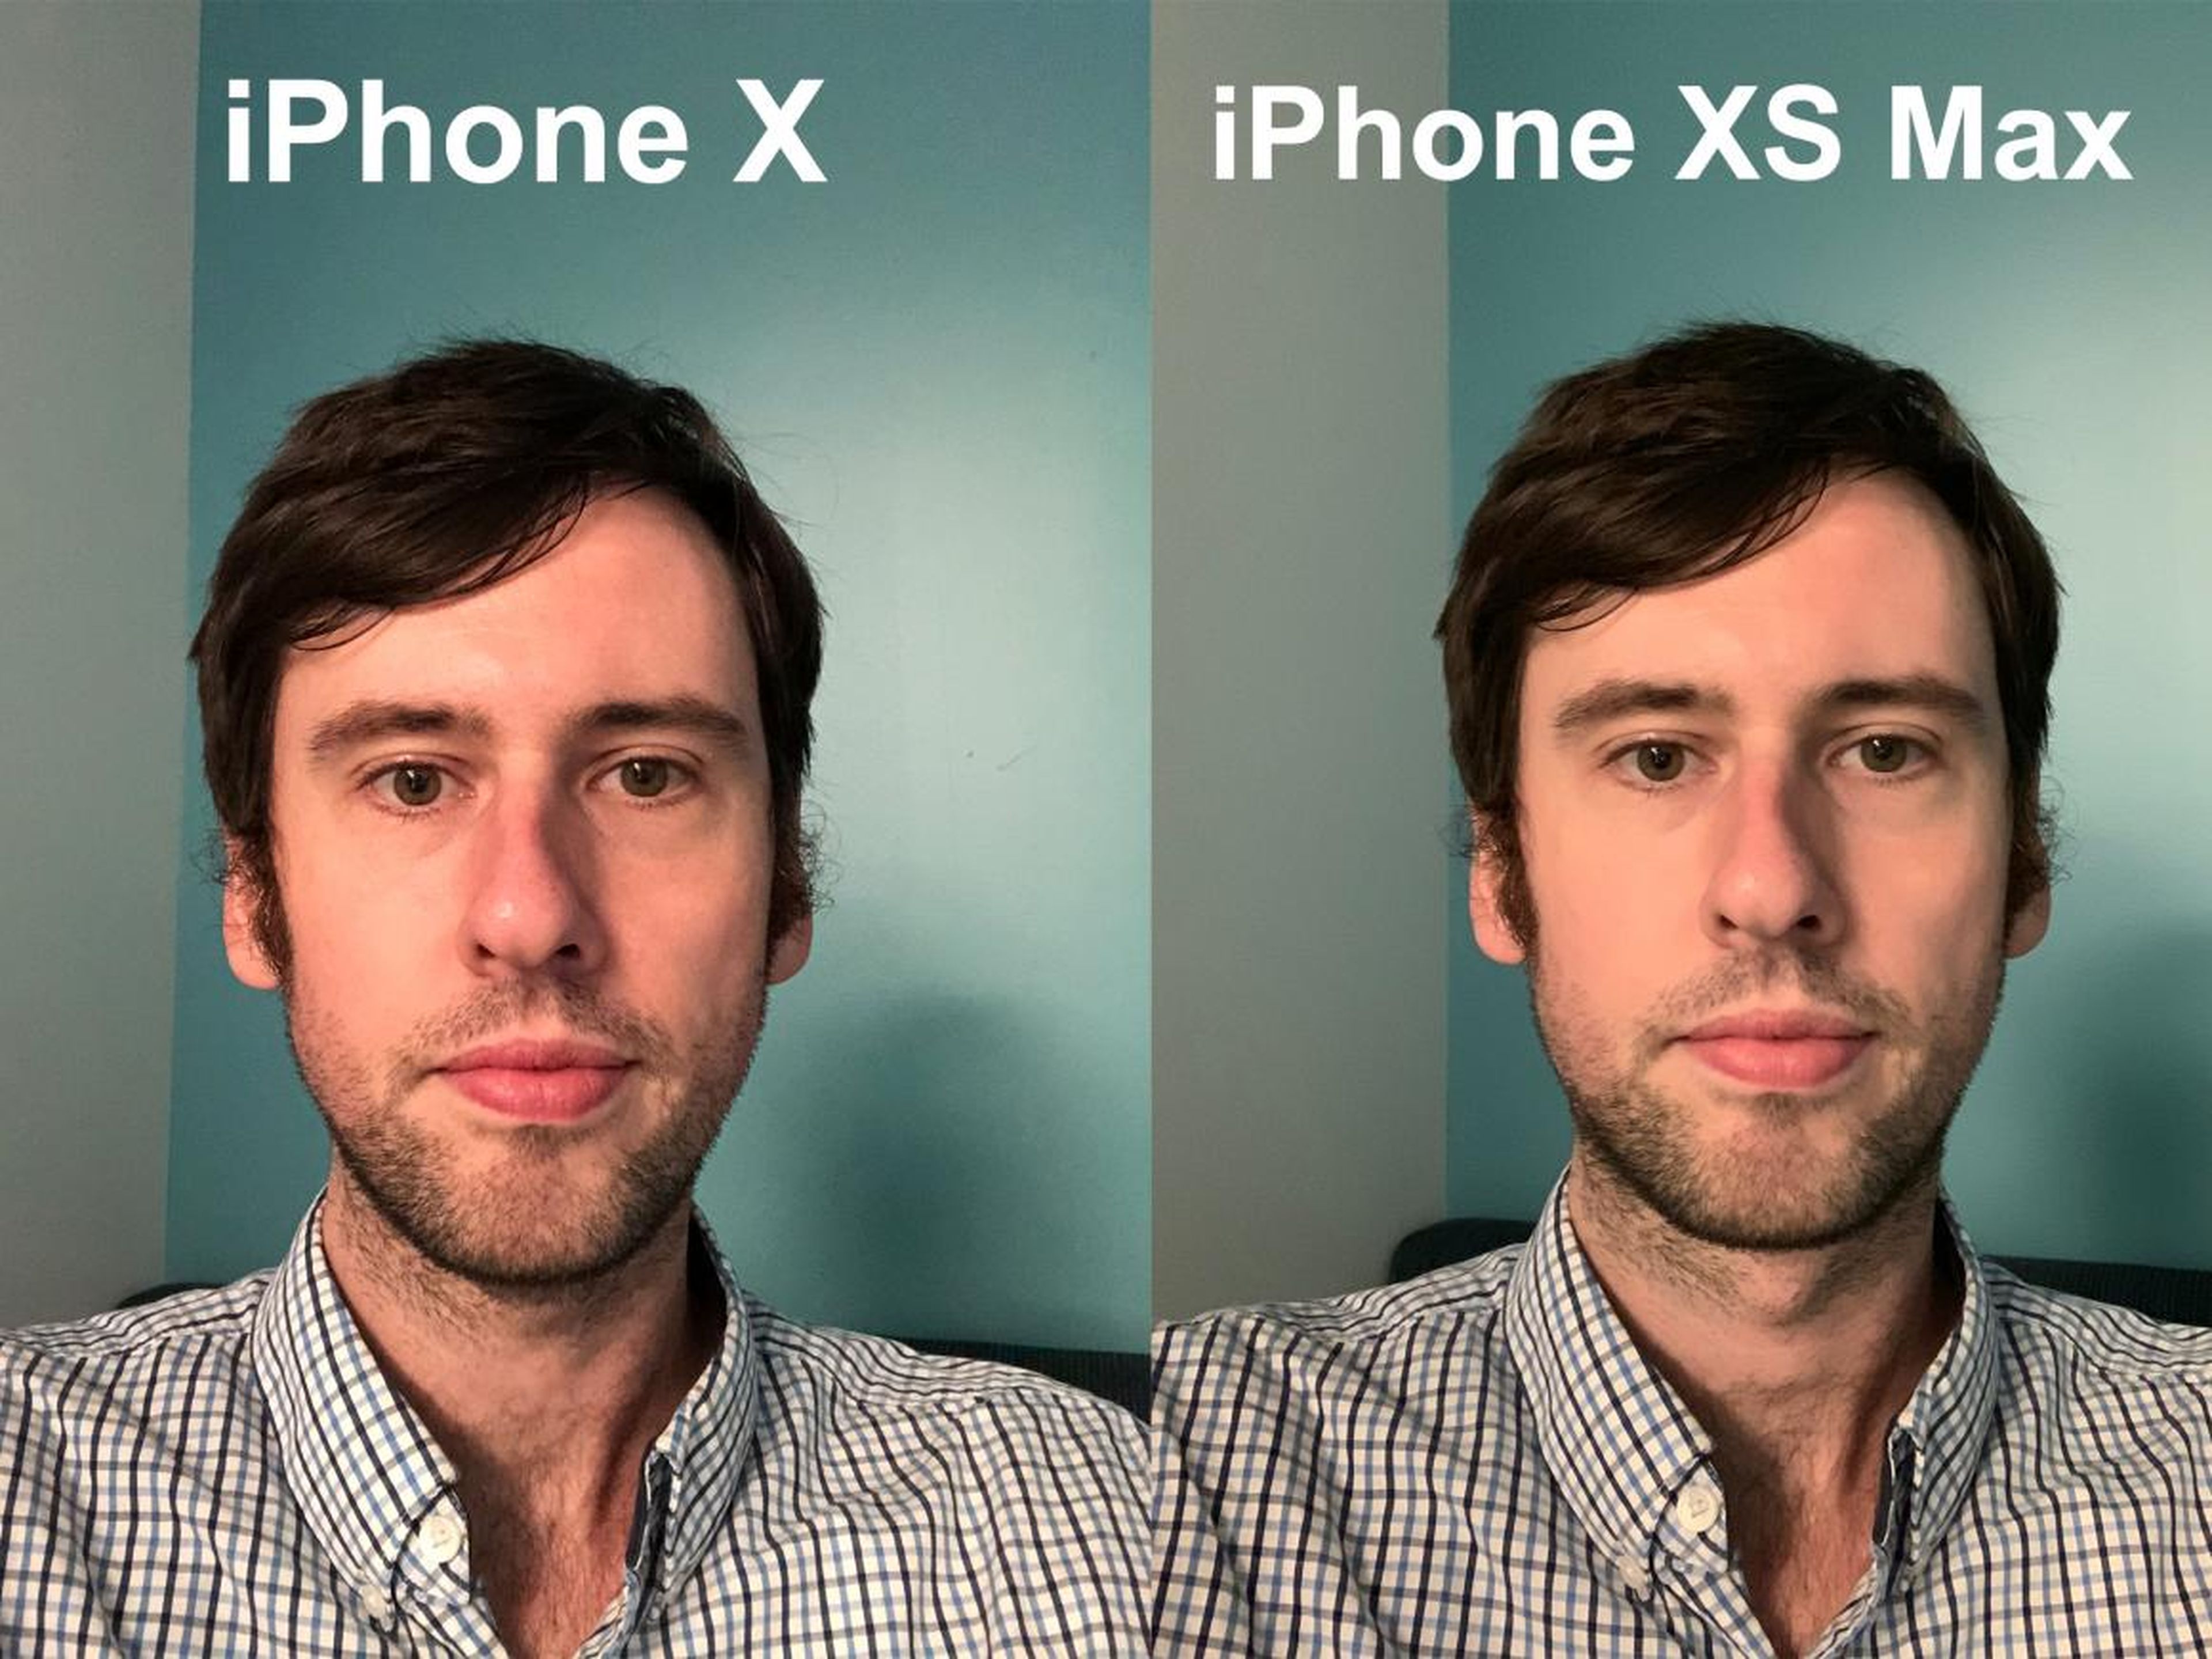 The iPhone XS made my face look like it was airbrushed or painted here.